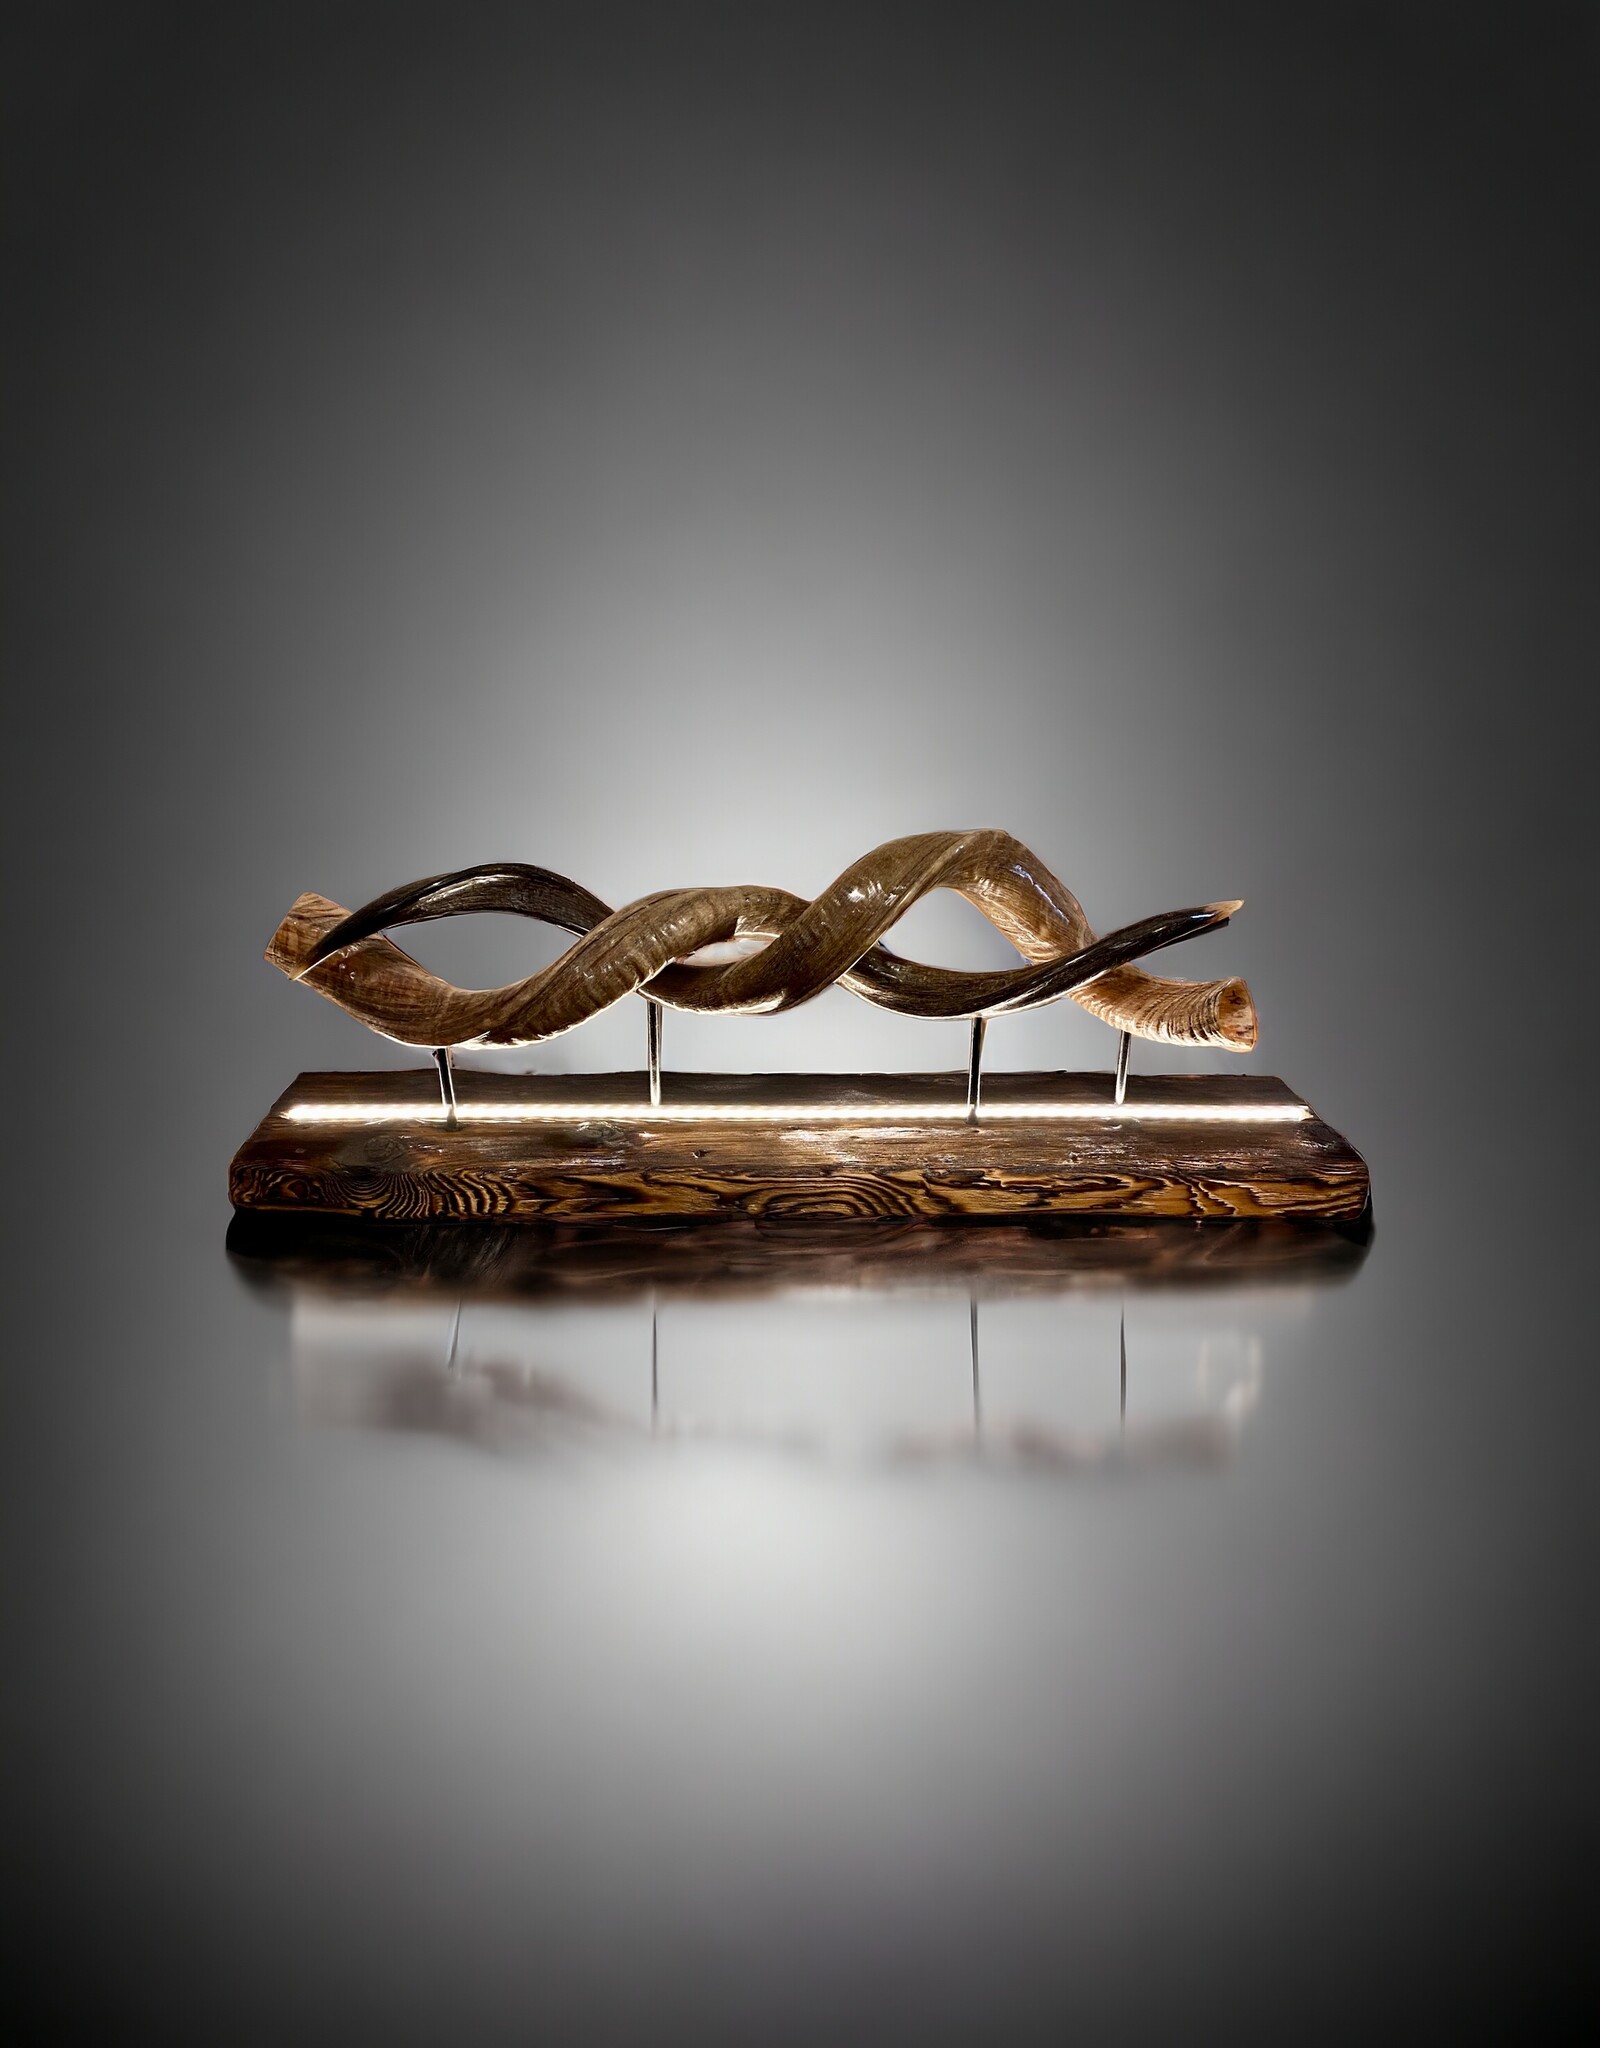 Handcrafted Kudu Horn Table Sculpture – Unique Exotic Design with LED Lighting